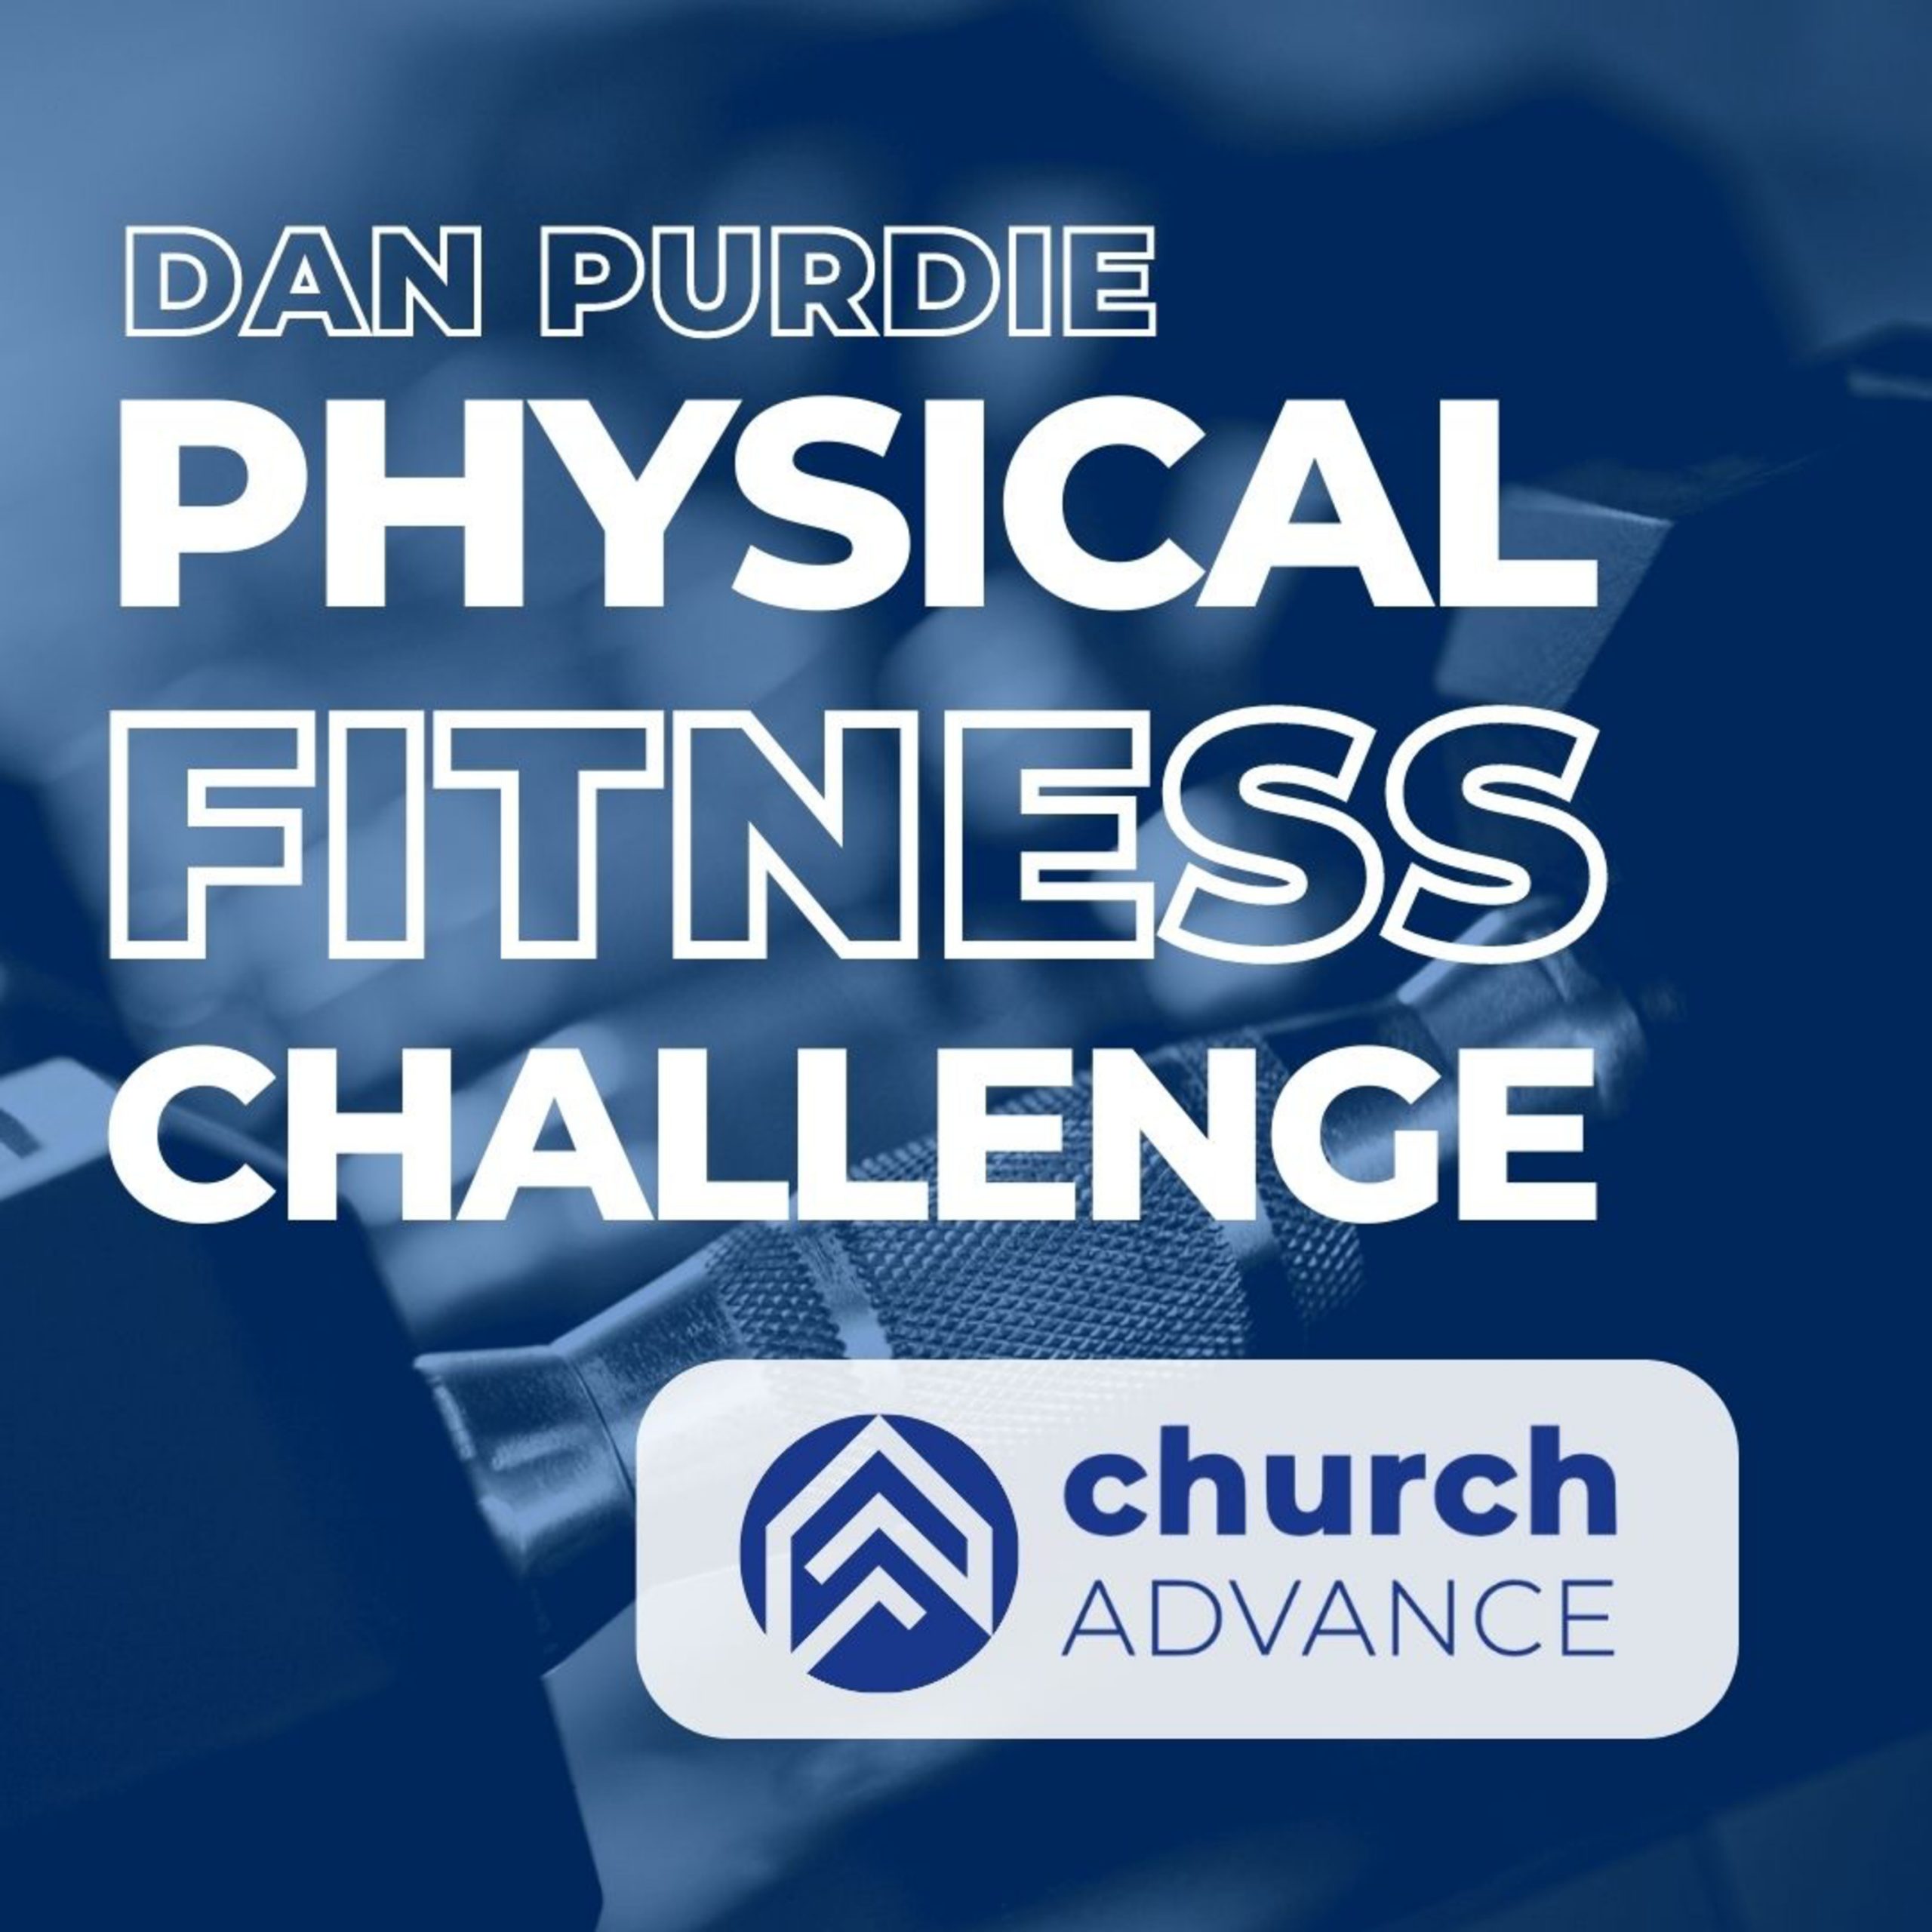 Your Physical Fitness Challenge